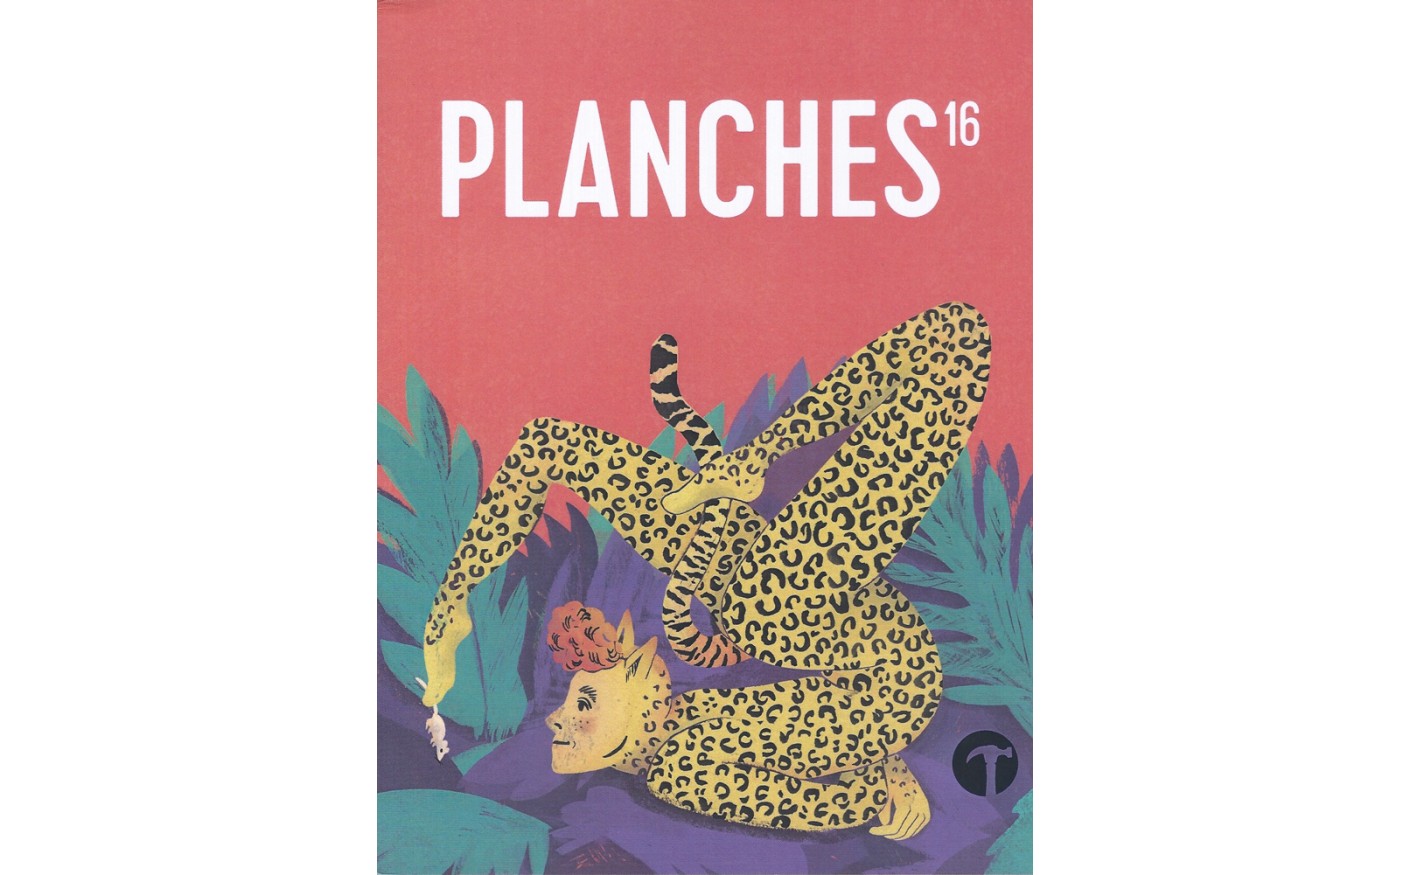 PLANCHES 16